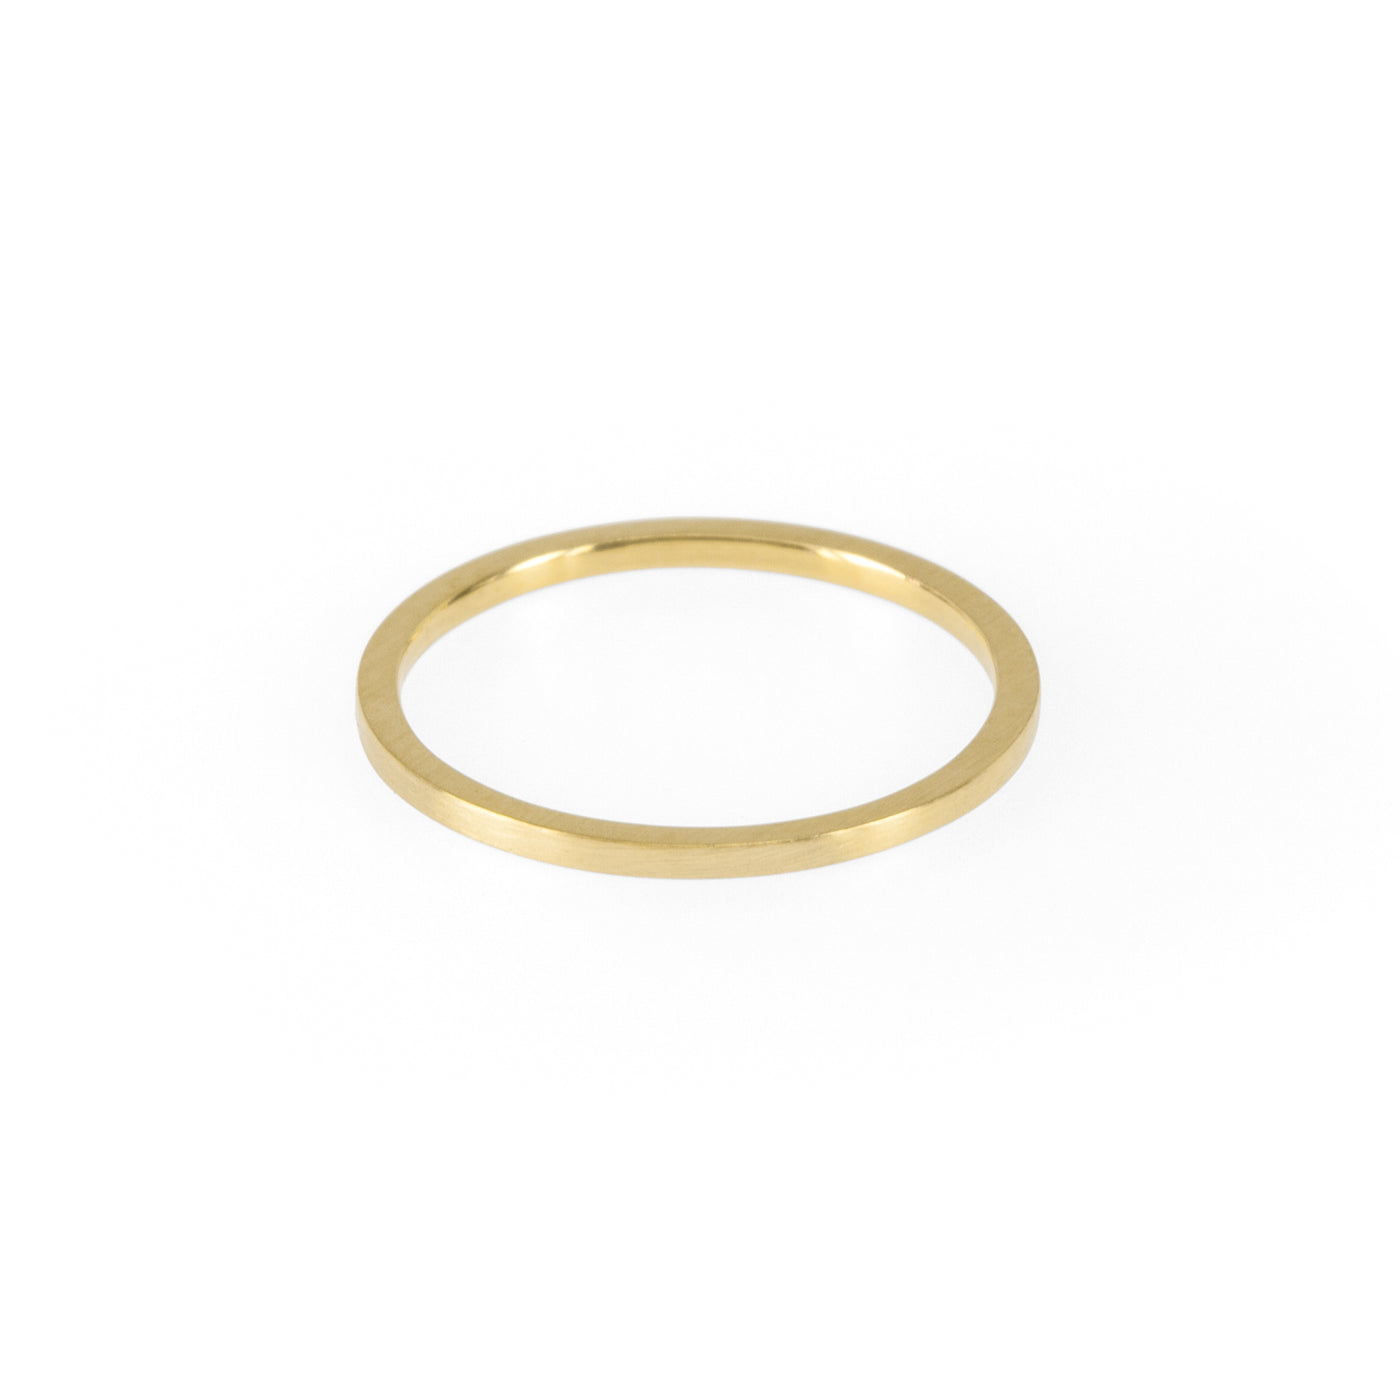 Sustainable gold ring. This ethical Simple Band is handmade in Cape Town in recycled gold from e-waste.